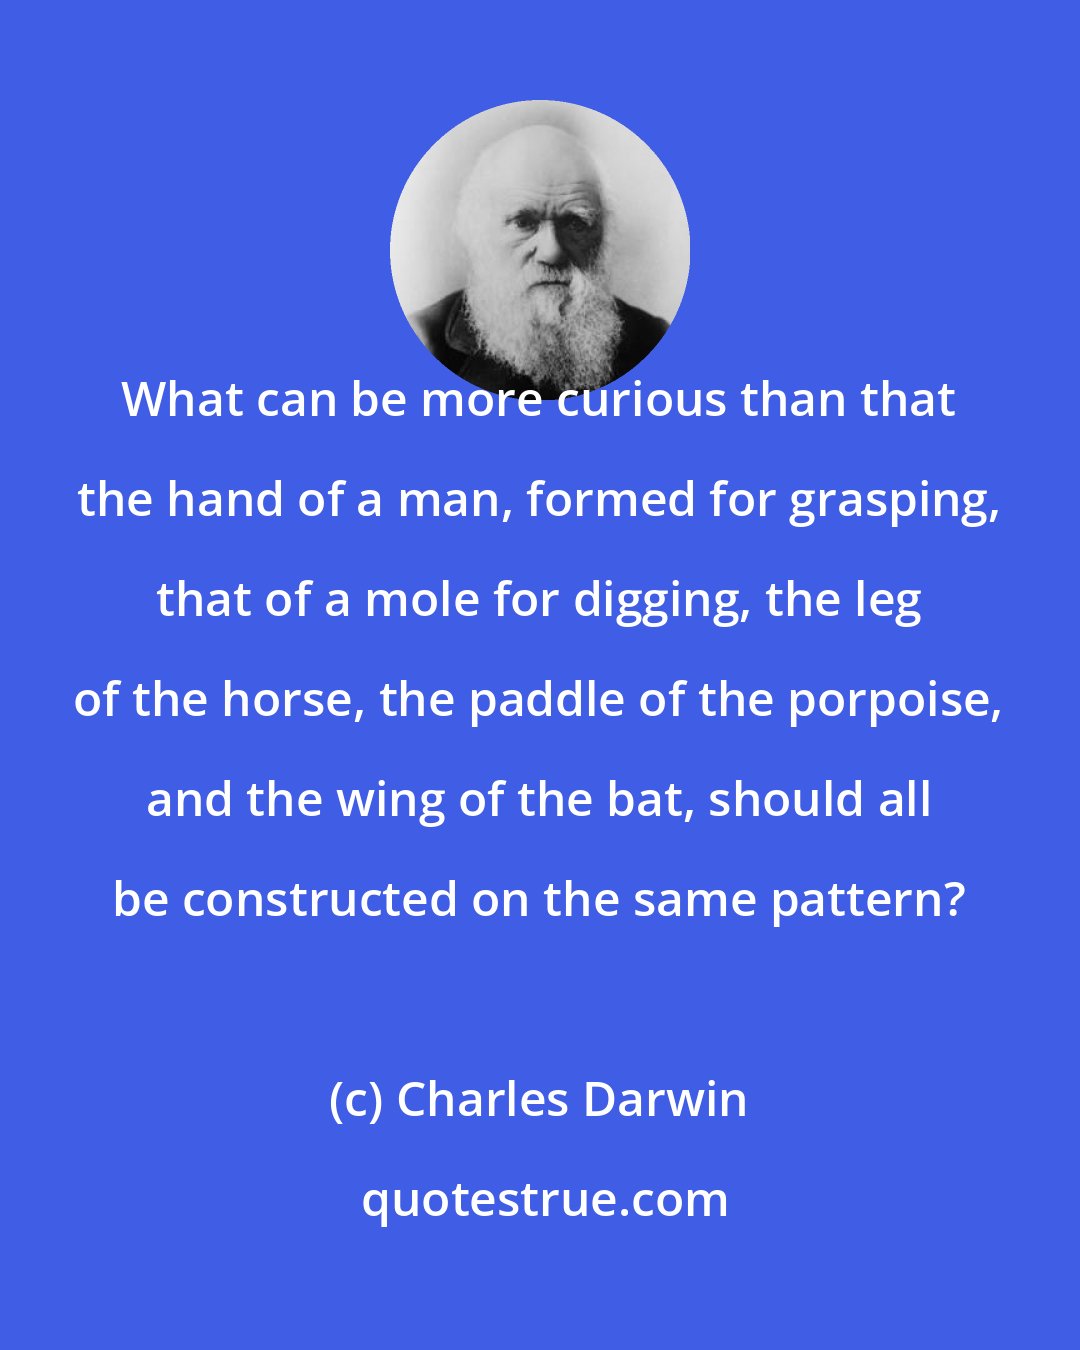 Charles Darwin: What can be more curious than that the hand of a man, formed for grasping, that of a mole for digging, the leg of the horse, the paddle of the porpoise, and the wing of the bat, should all be constructed on the same pattern?